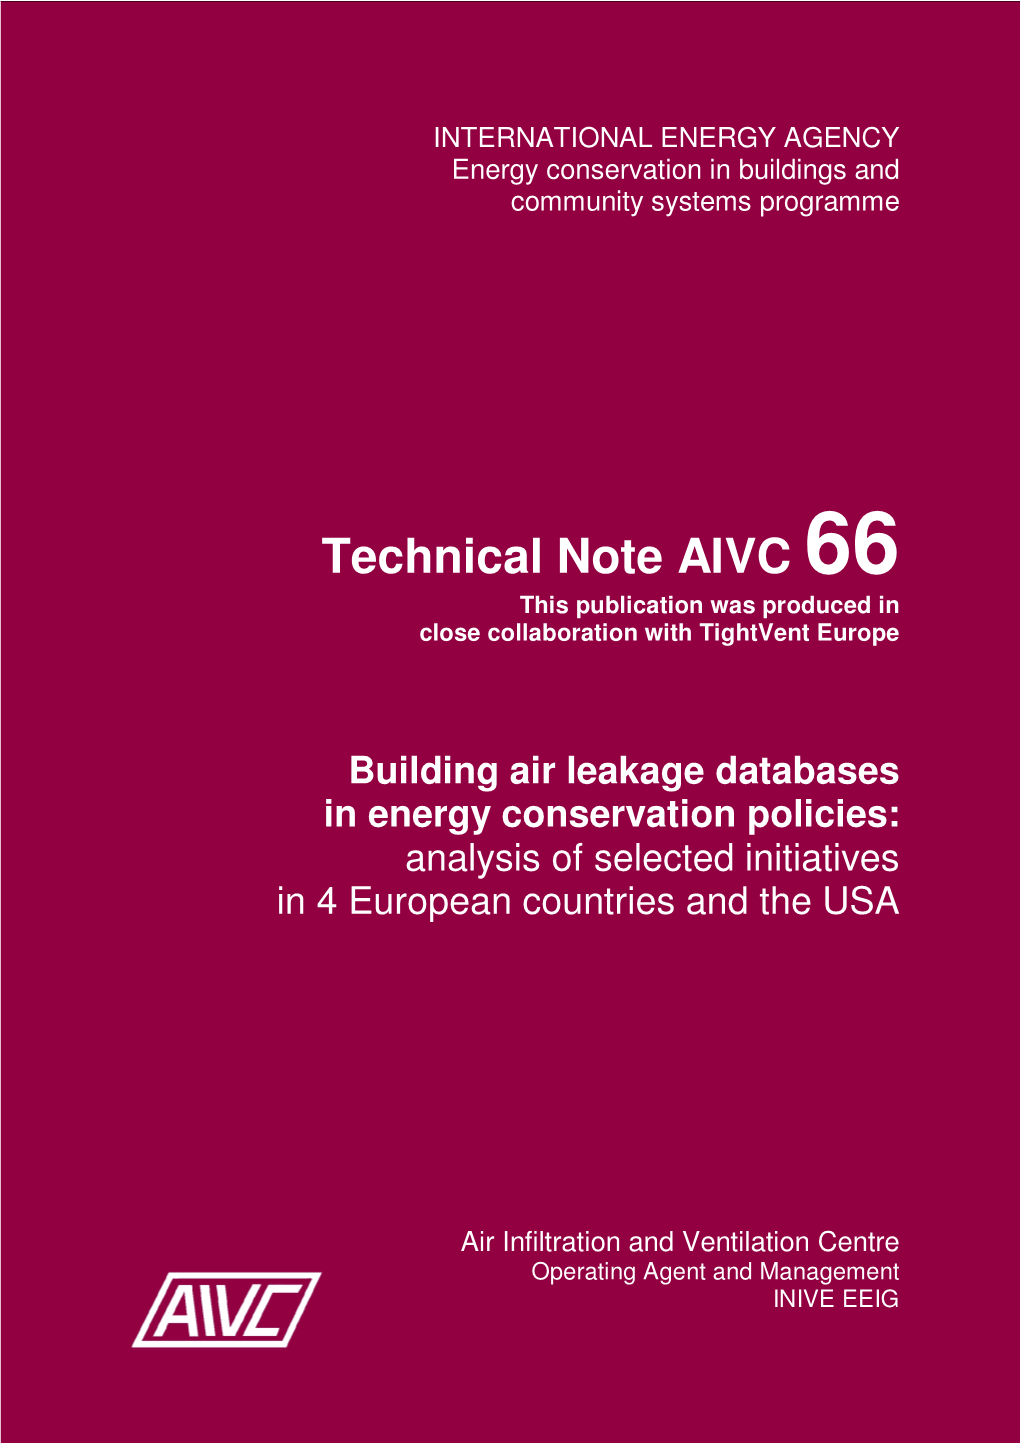 Building Air Leakage Databases in Energy Conservation Policies: Analysis of Selected Initiatives in 4 European Countries and the USA